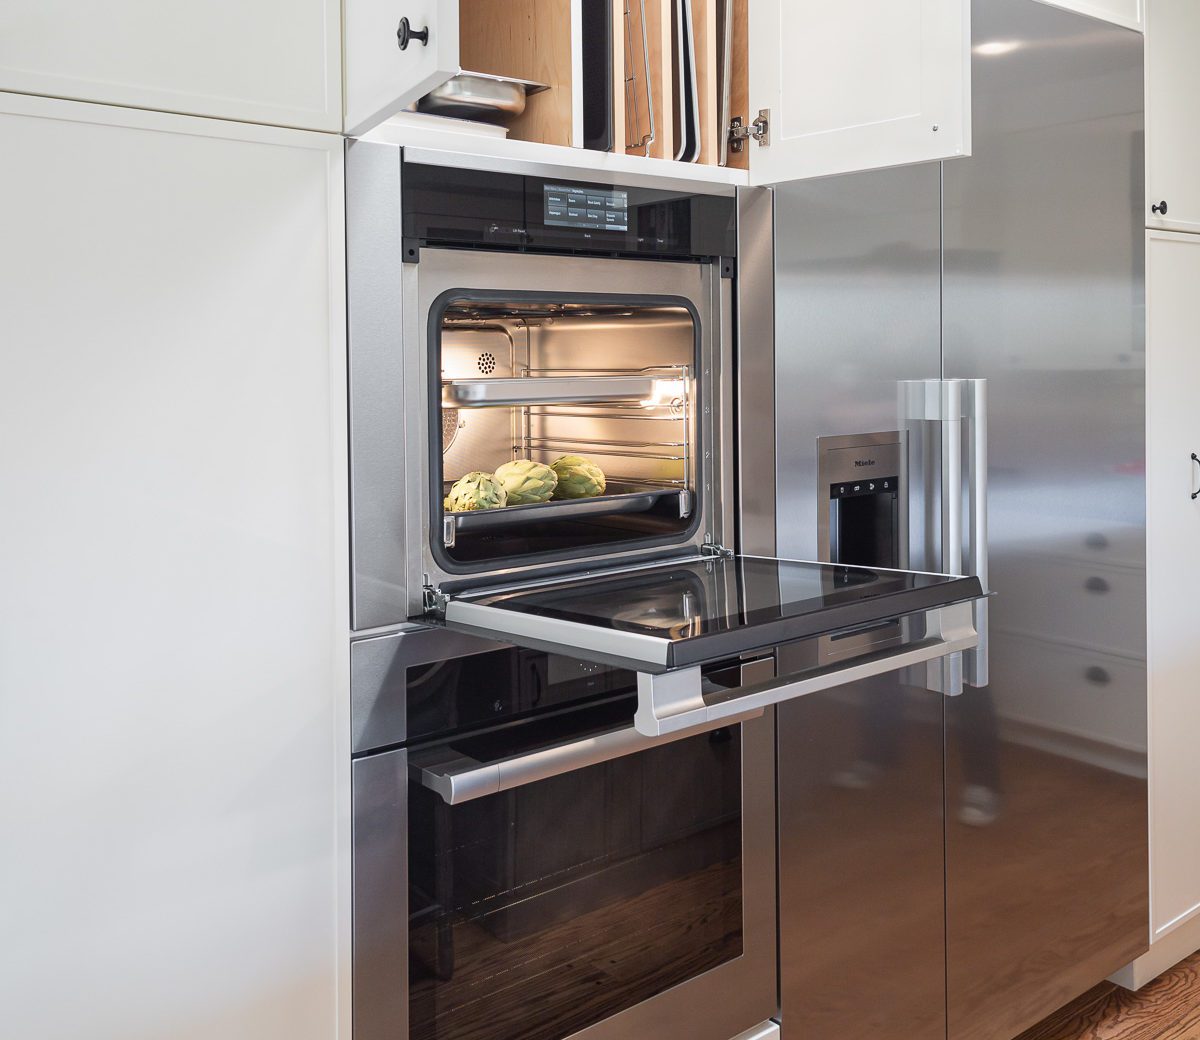 White cabinets Miele refrigerator and modern steam-oven